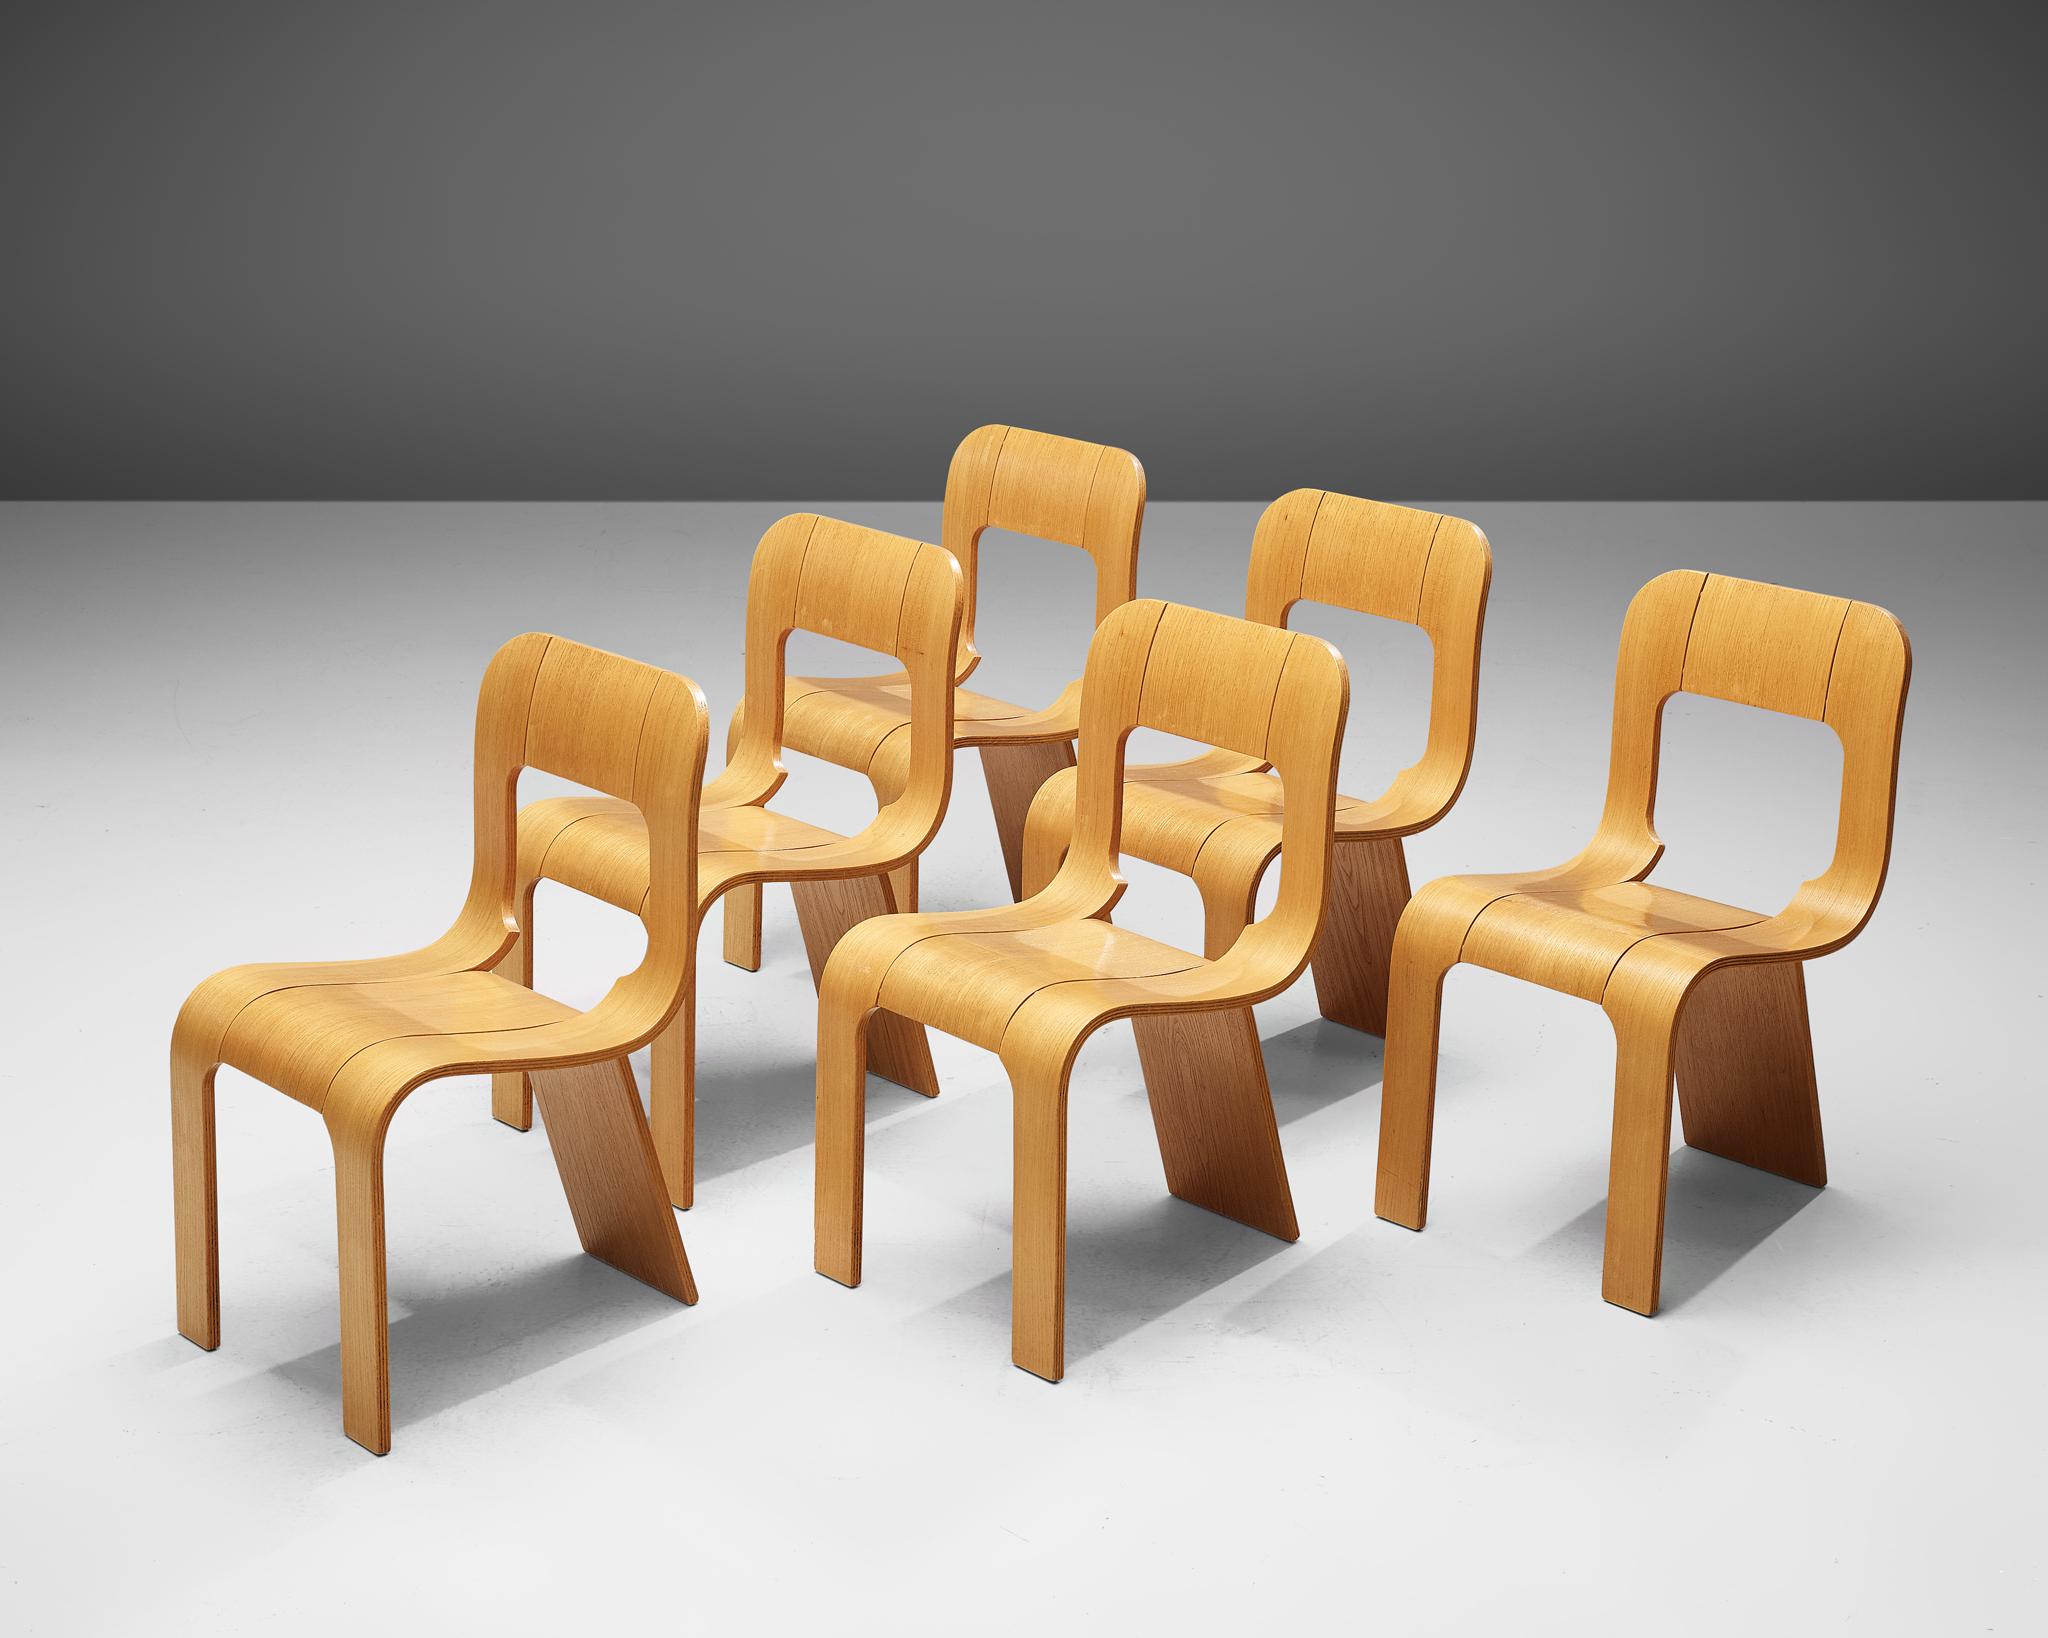 Gigi Sabadin for Stilwood, set of six chairs, ash plywood, Italy, 1970s.

An inventive design by the Italian Gigi Sabadin, these chairs are made of bent ash plywood with a veneered finish. The organic design seems to be made of one piece, which is